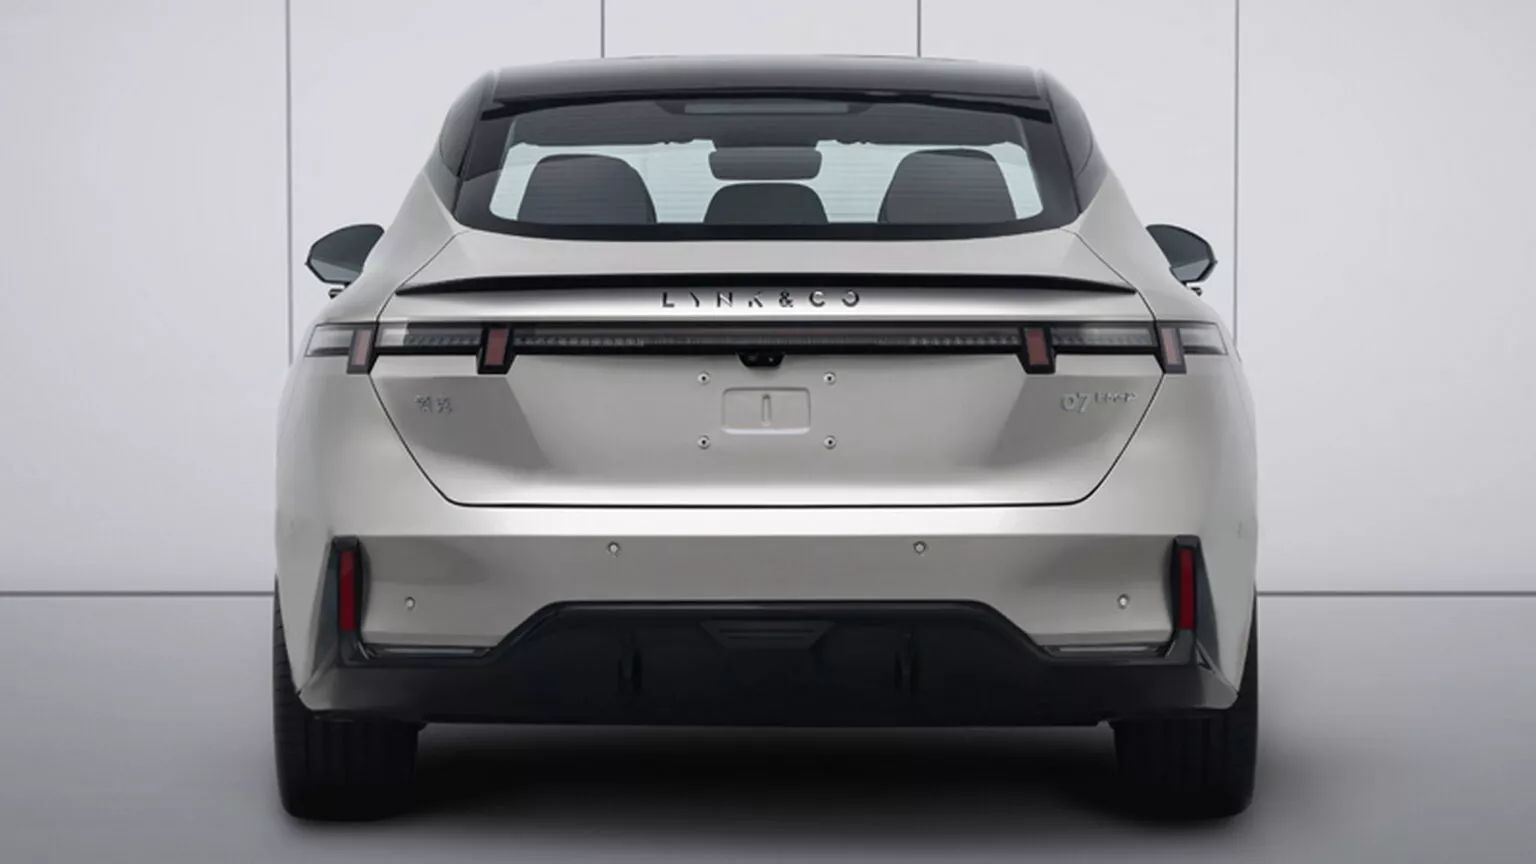 Lynk Co 07 EM P 2 - First Official Photos of Lynk & Co 07 EM-P Unveiled Ahead of Official Debut